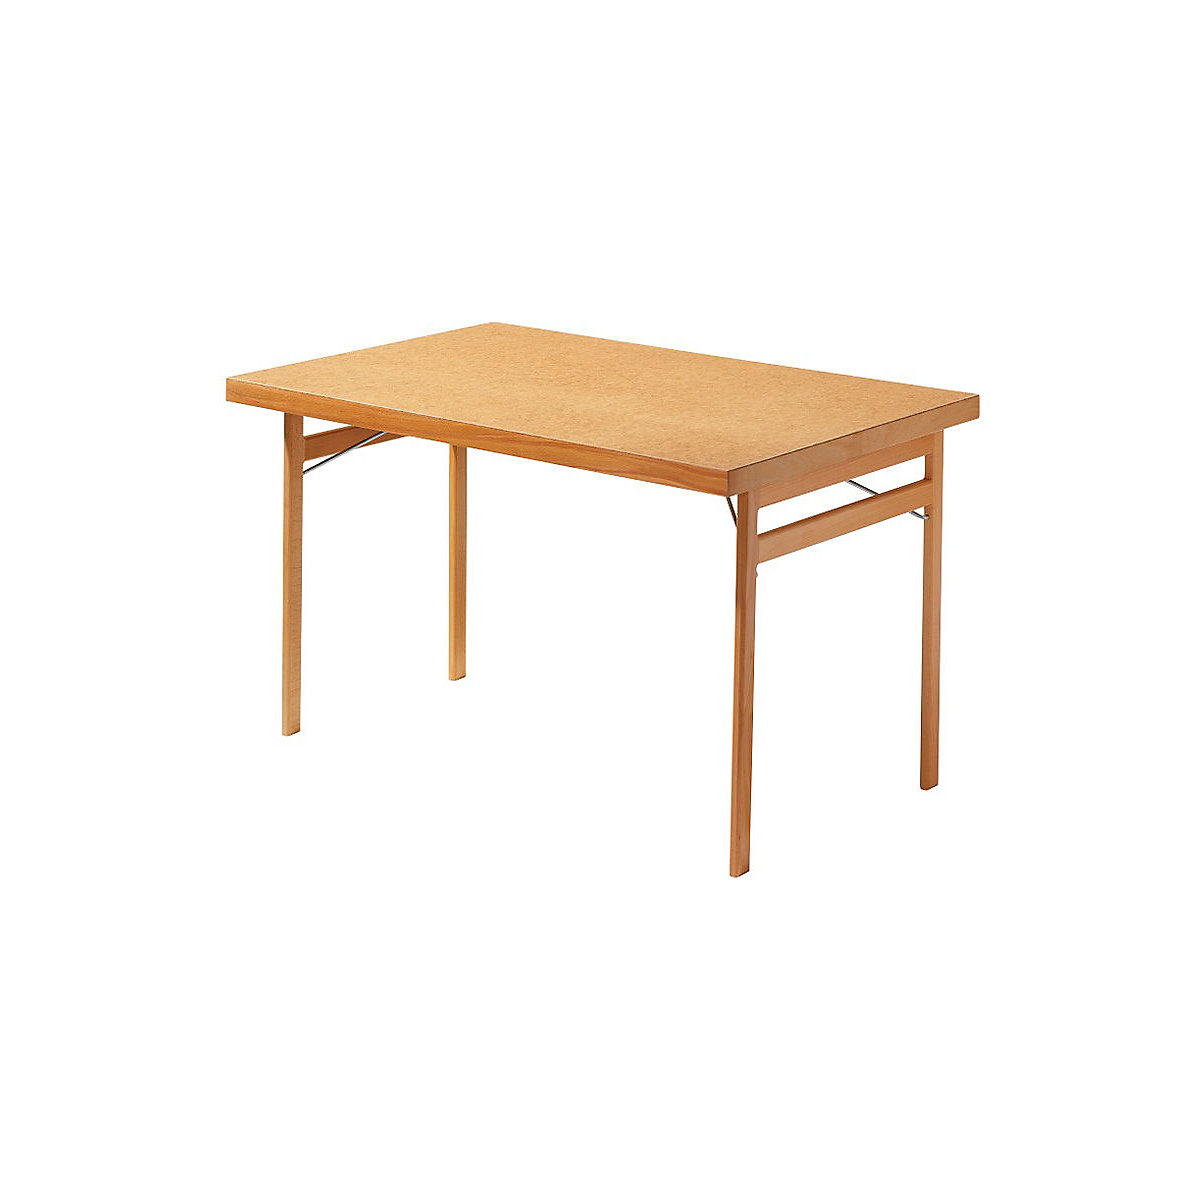 Folding table, solid wood frame, beech, WxD 1500 x 800 mm, wood tabletop-3